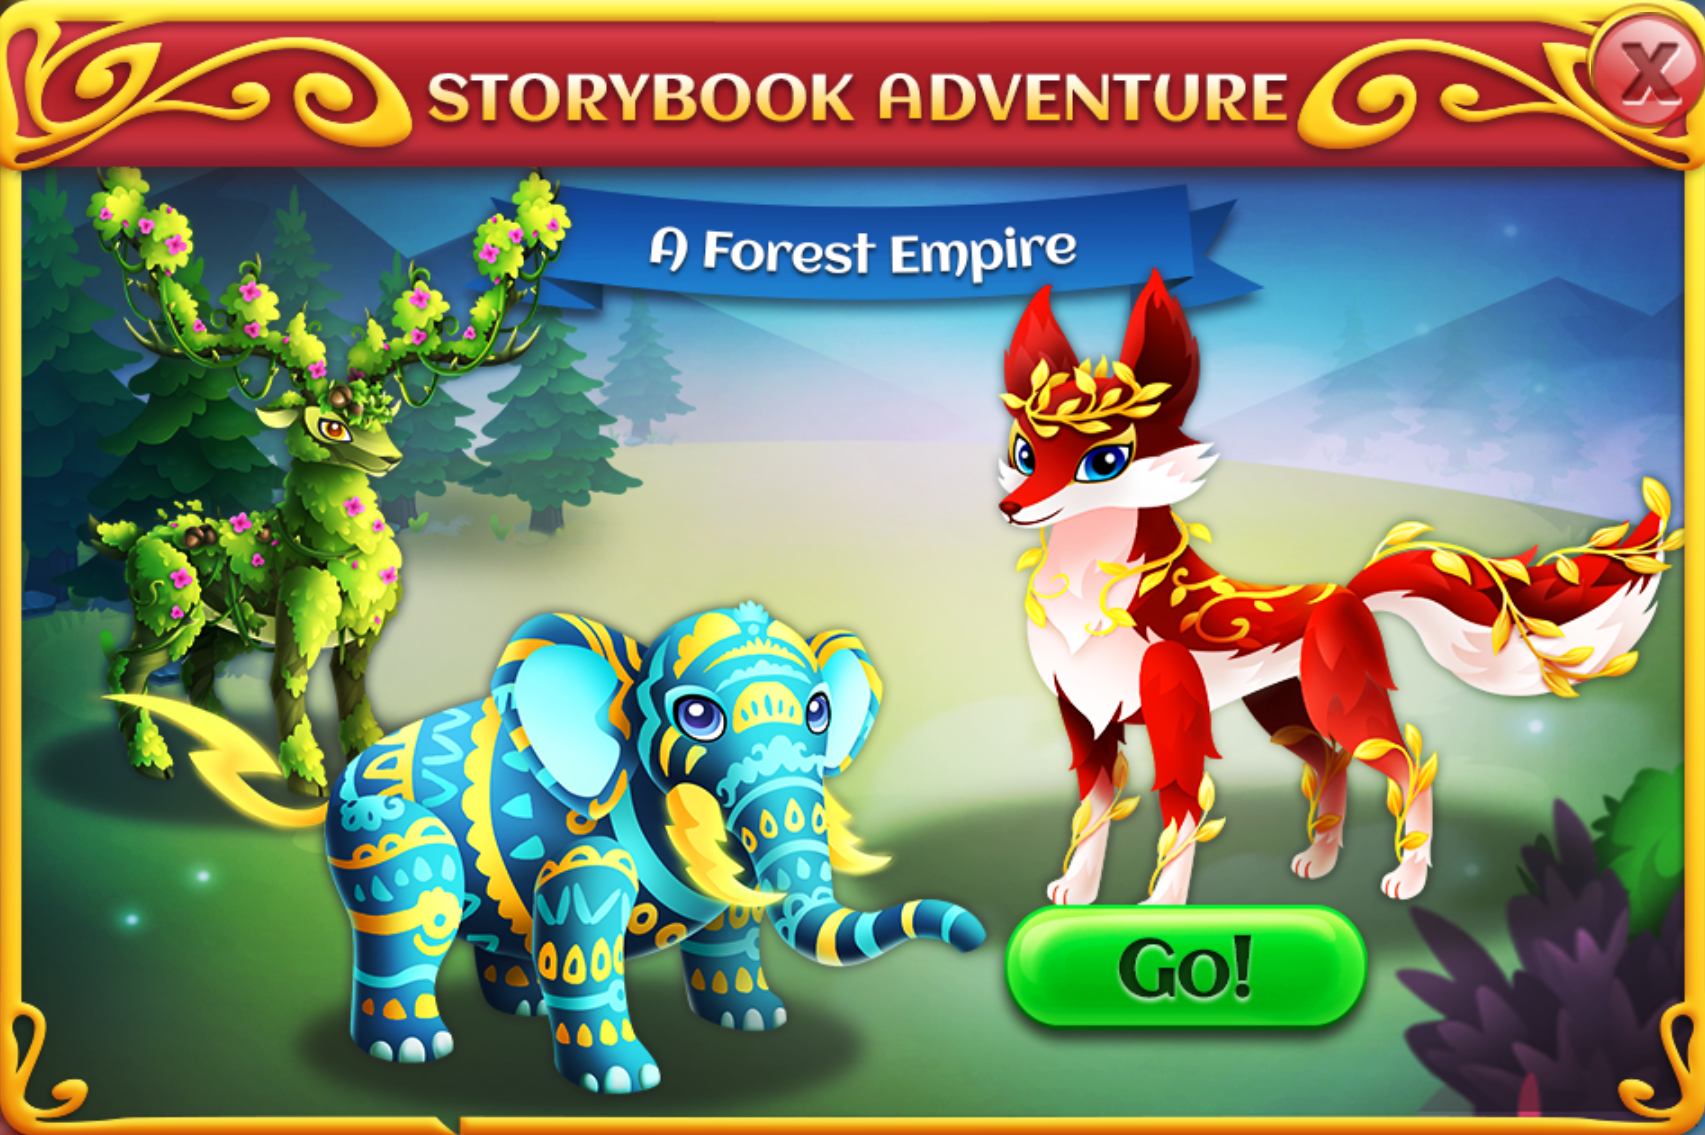 fantasy forest story magic masters mod